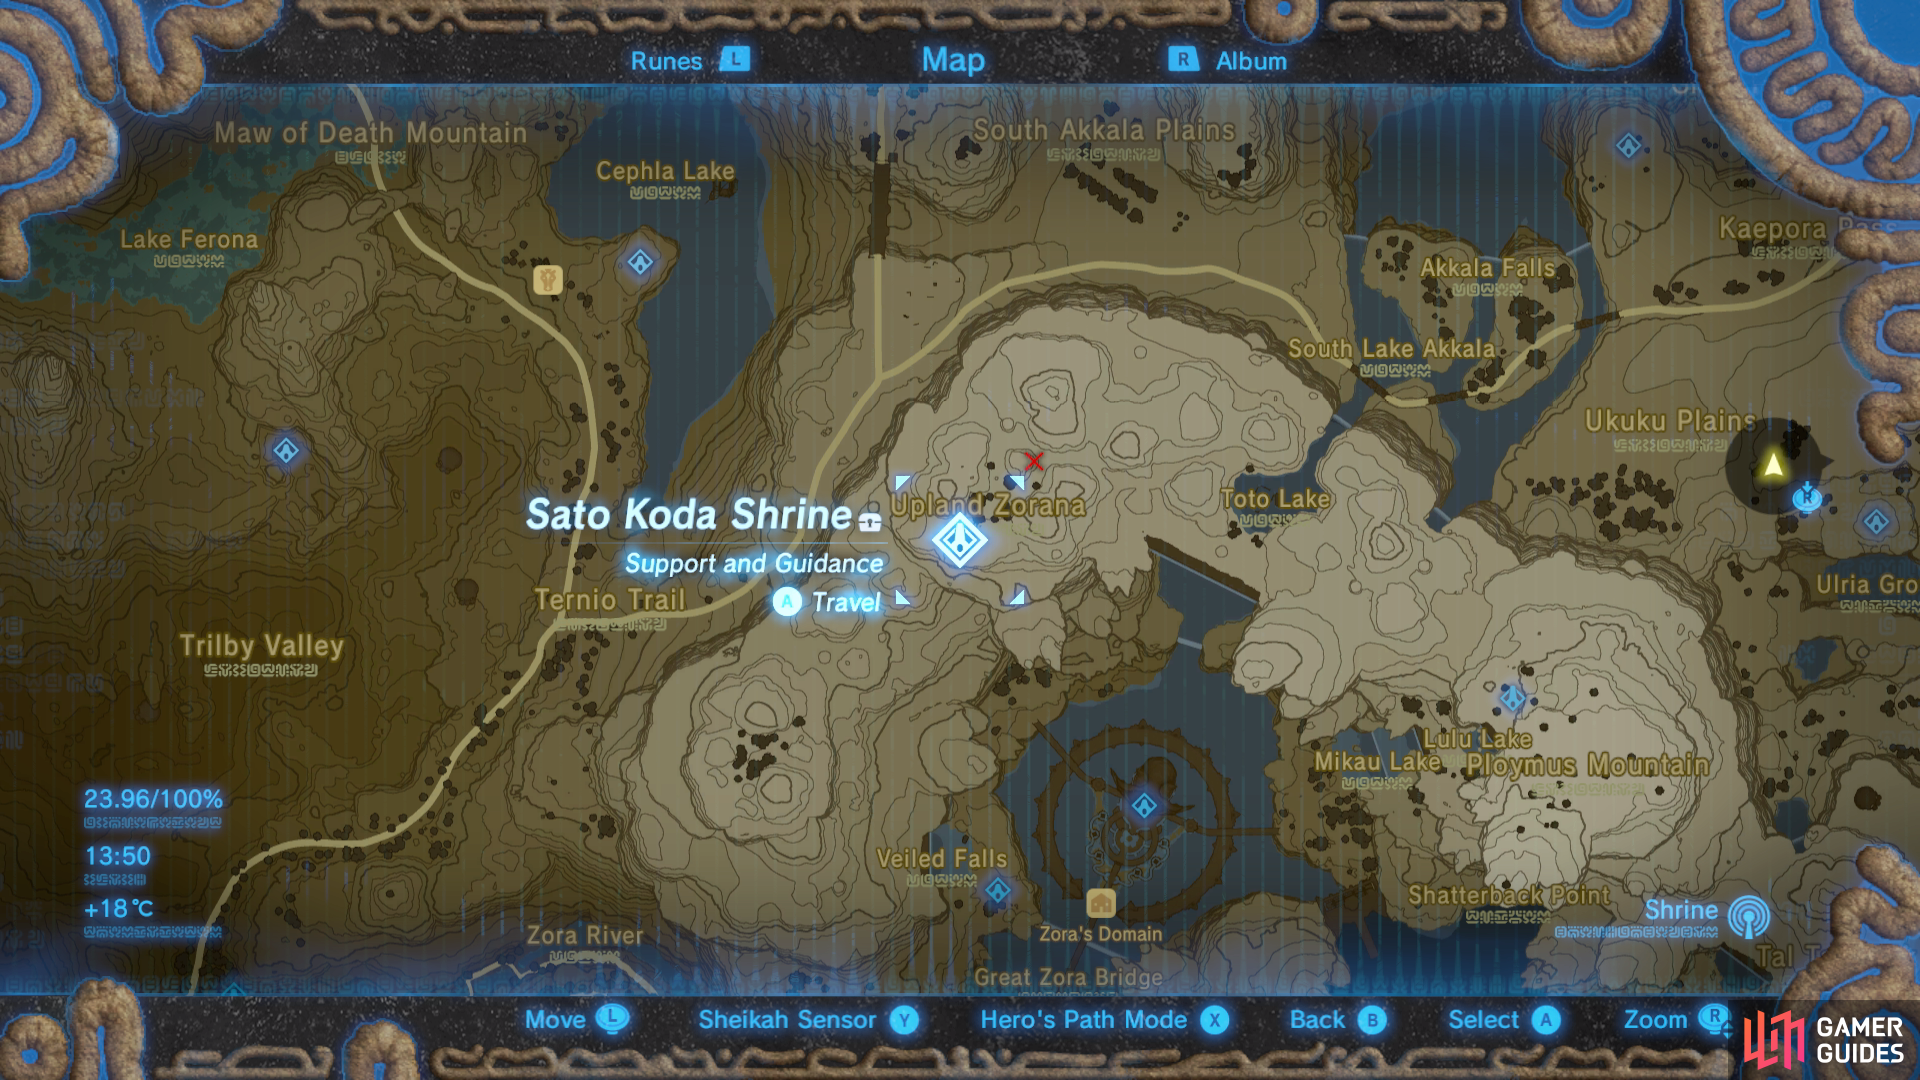 This shrine is found west of Toto Lake and north of Zora's Domain